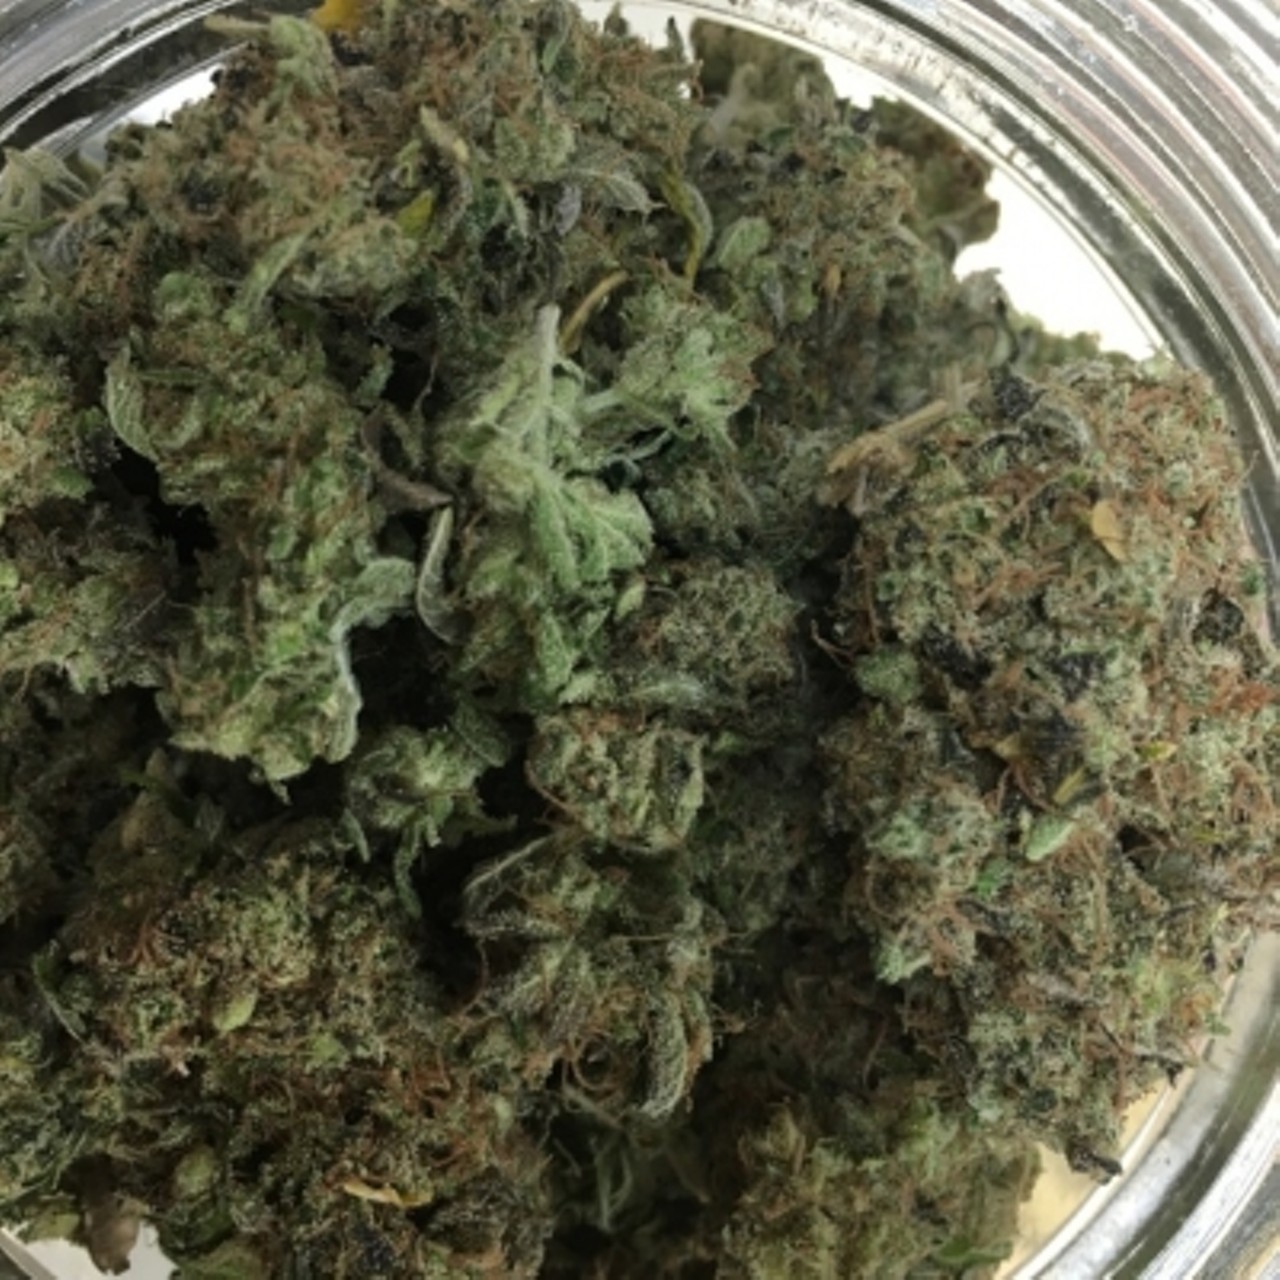 Bank of Buds
Get more bang for your buck at Bank of Buds on the northwest side of Detroit. Secure facility and friendly staff will help you get anything you need from flowers to concentrates.
&nbsp;(313) 766-6125
22401 W. 8 Mile,&nbsp;Detroit, Michigan 48219